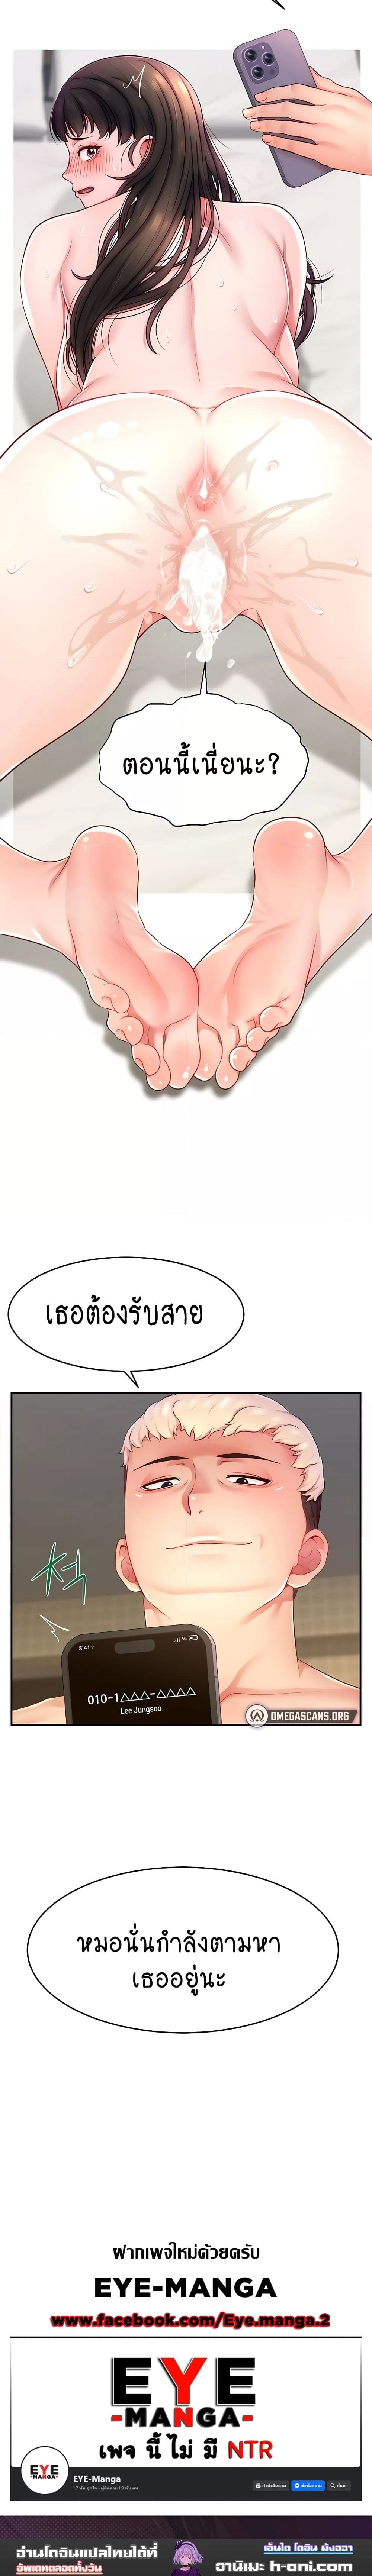 Making Friends With Streamers by Hacking! ตอนที่ 11 ภาพ 17